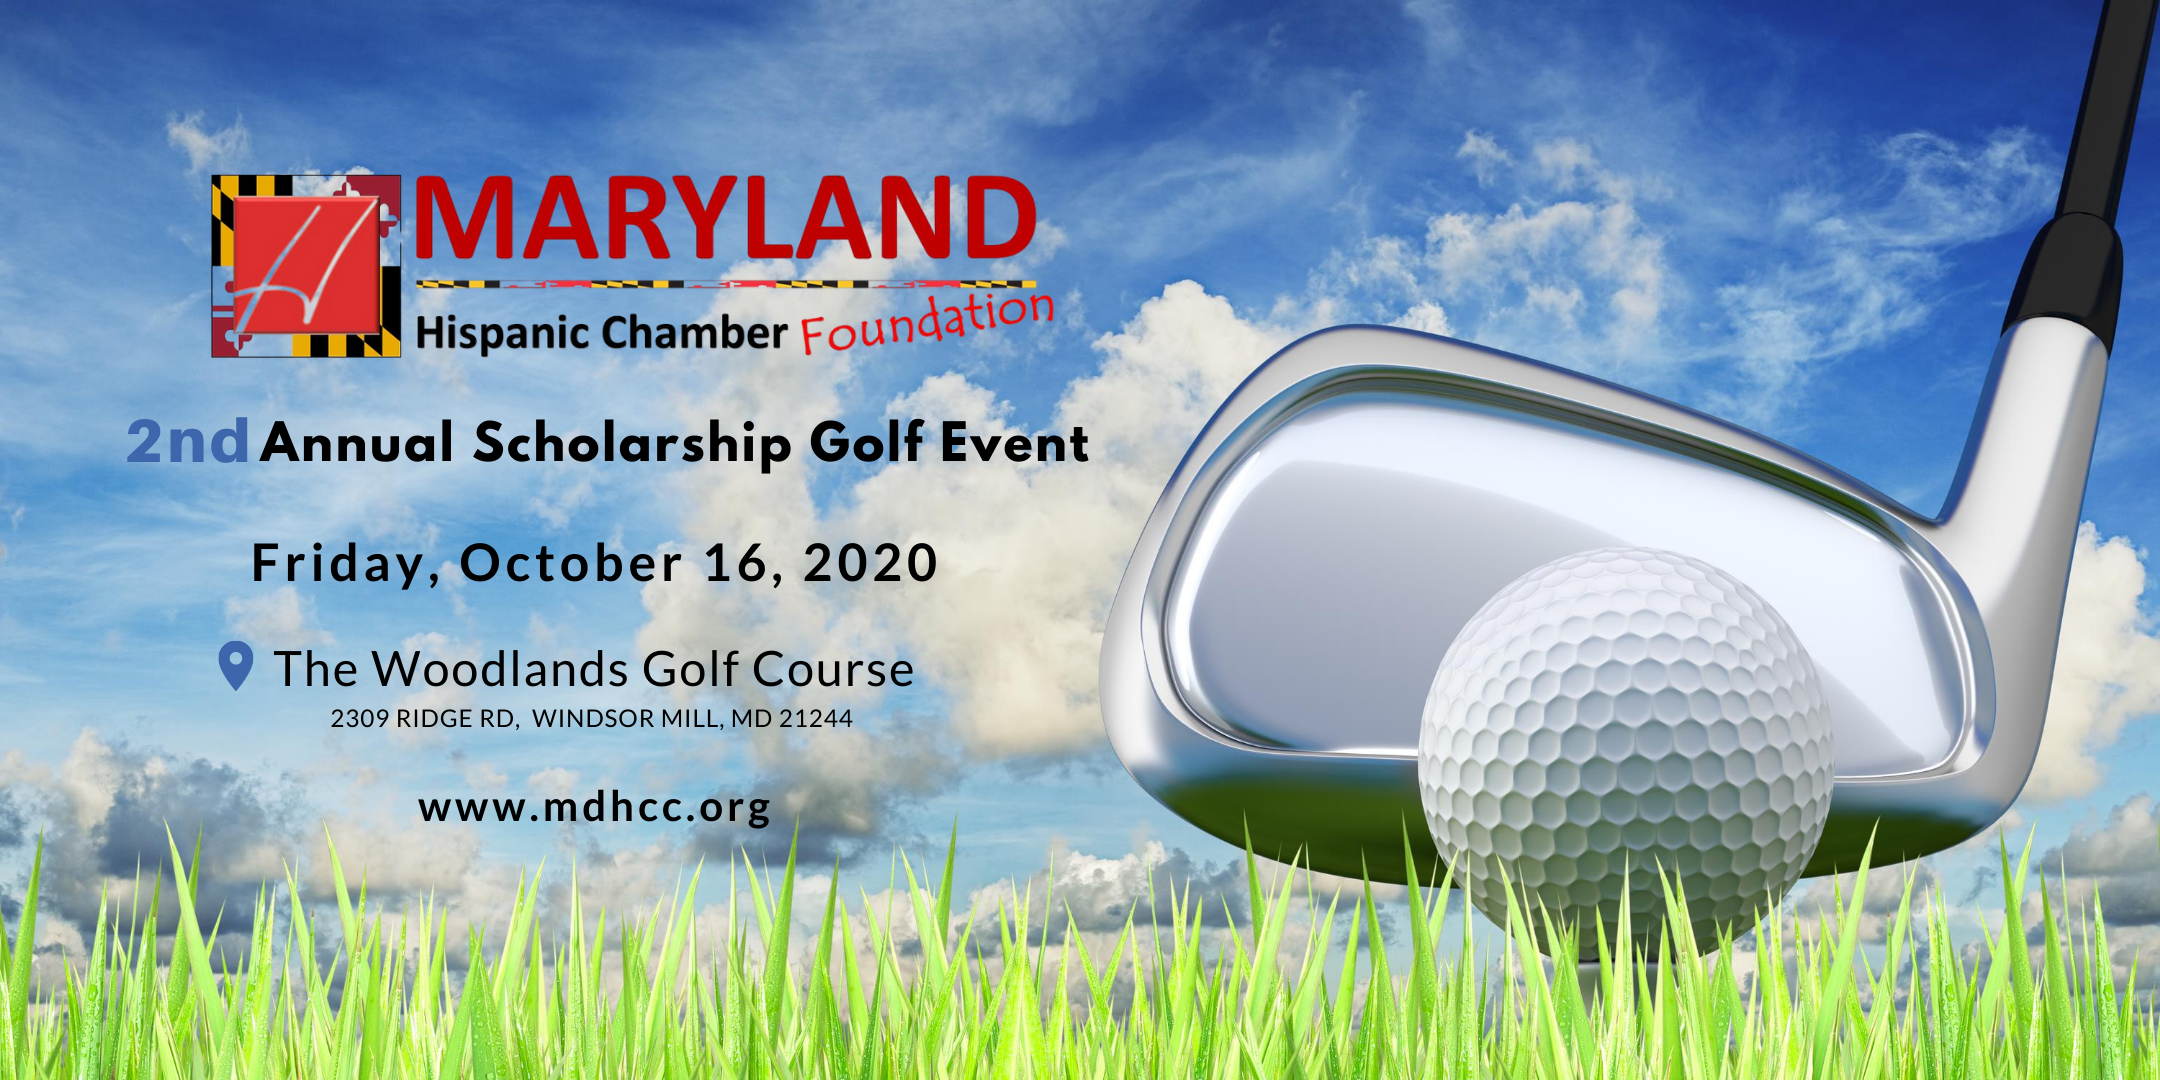 2nd Annual Scholarship Golf Event